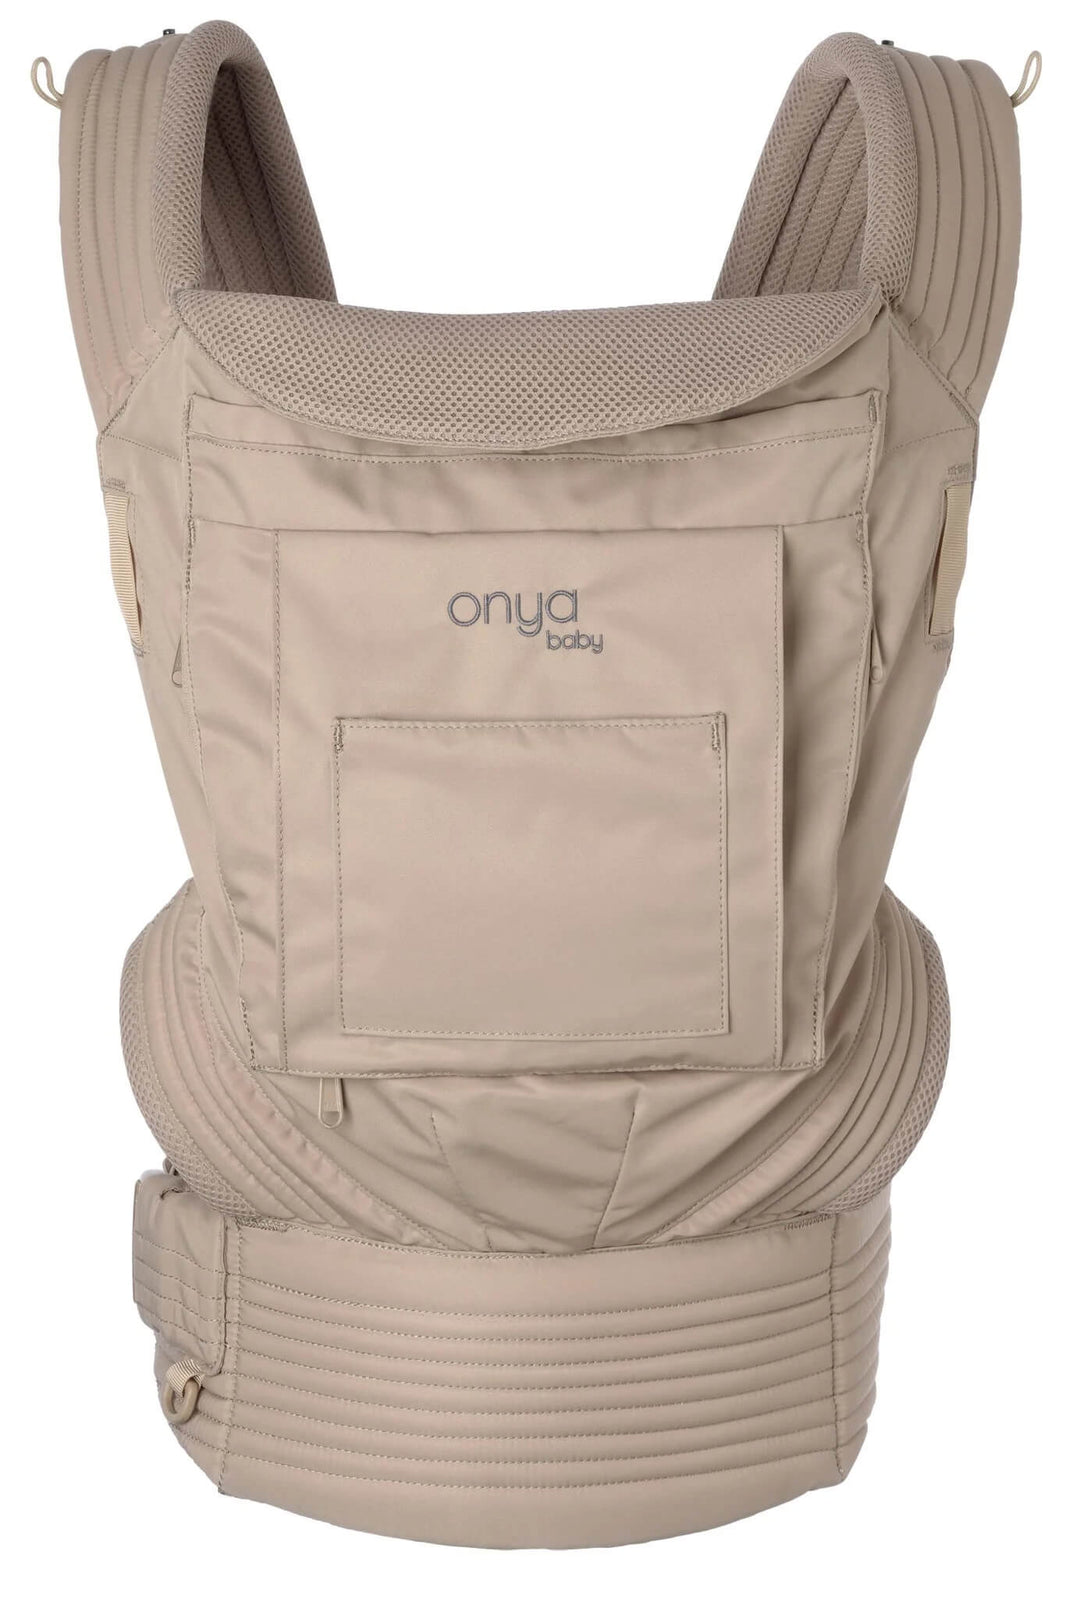 Front View of Warm Sand Colored Nexstep Baby Carrier by Onya Baby